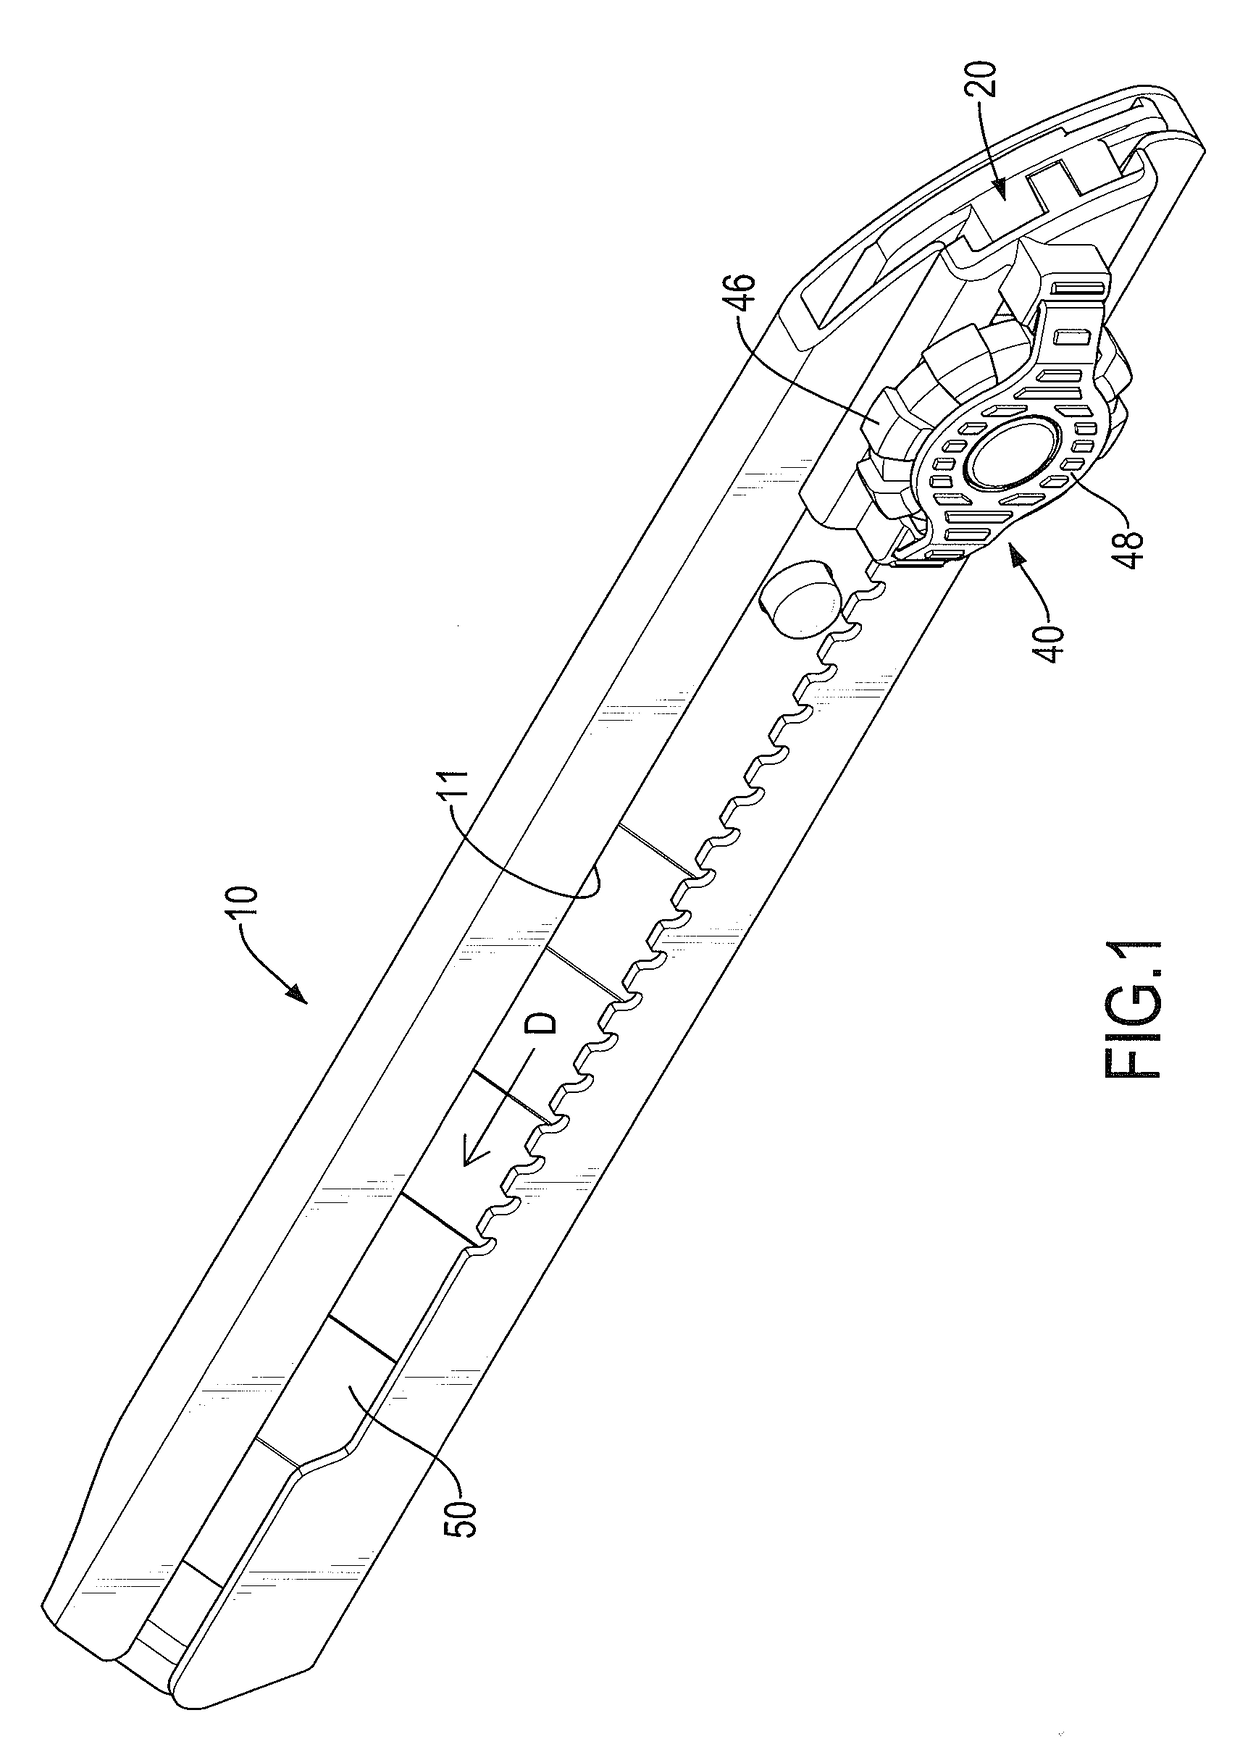 Cutter assembly having a screw-locking device